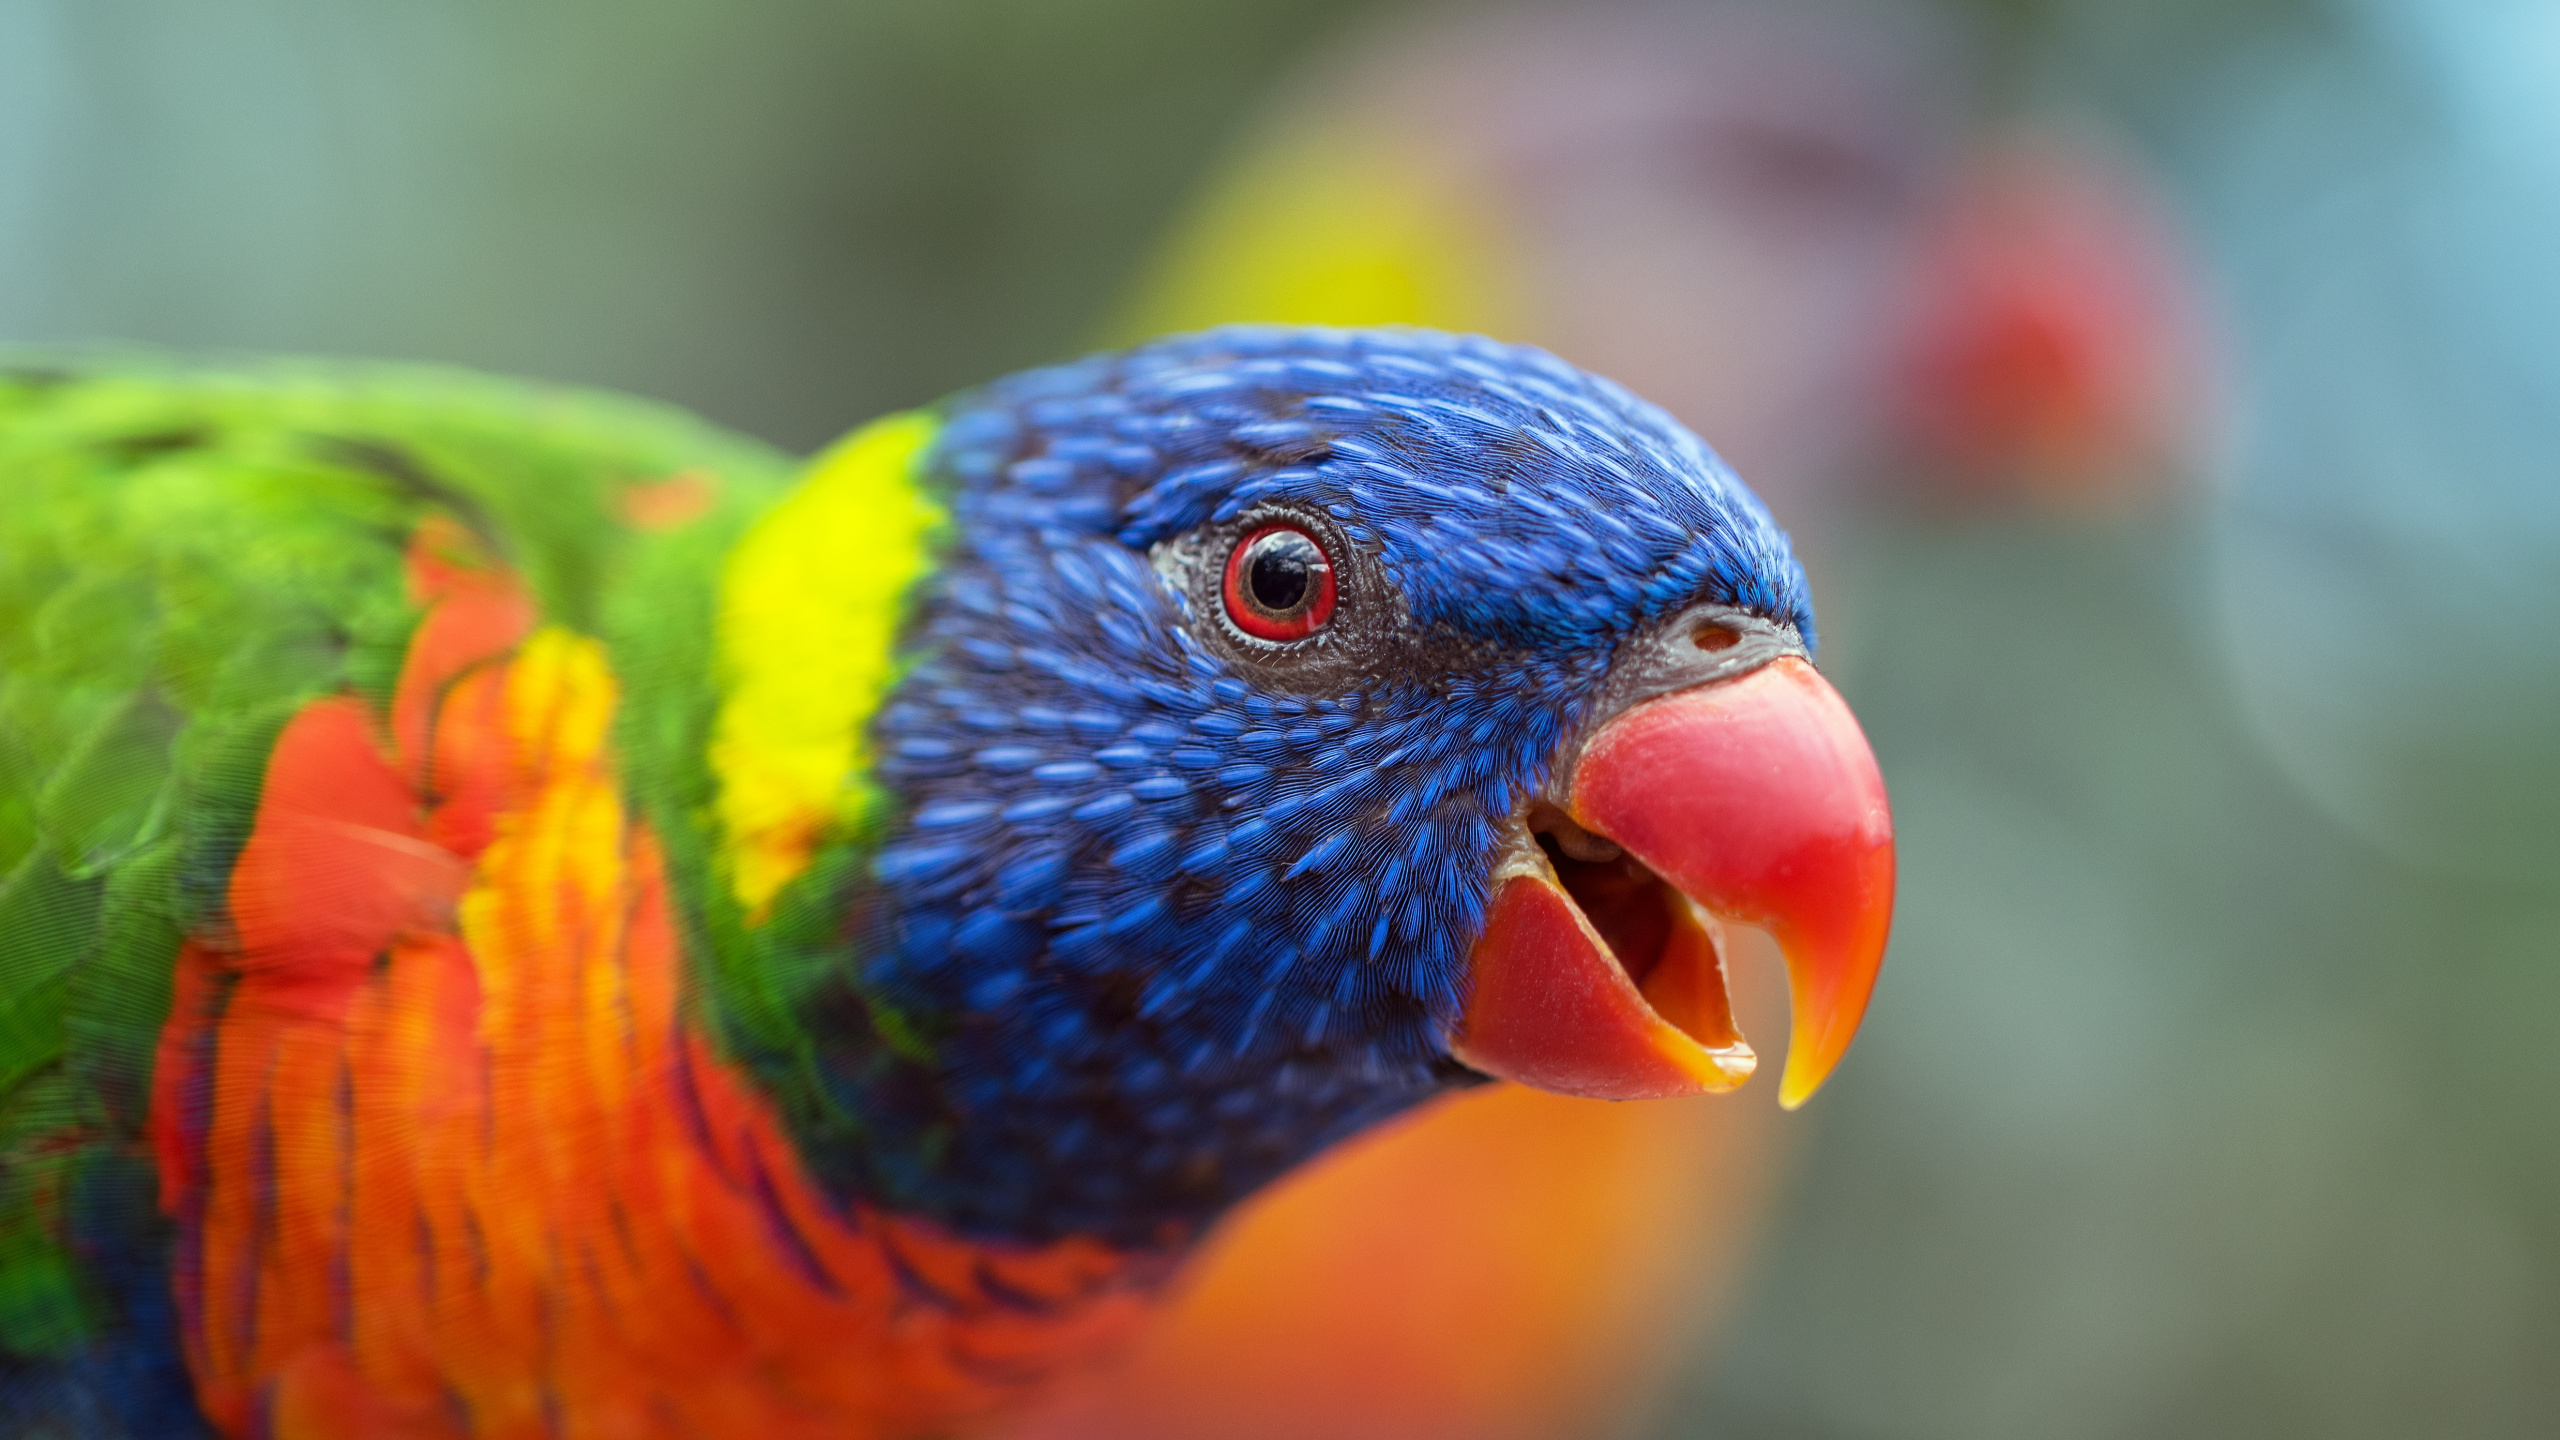 Blue Yellow and Red Bird. Wallpaper in 2560x1440 Resolution